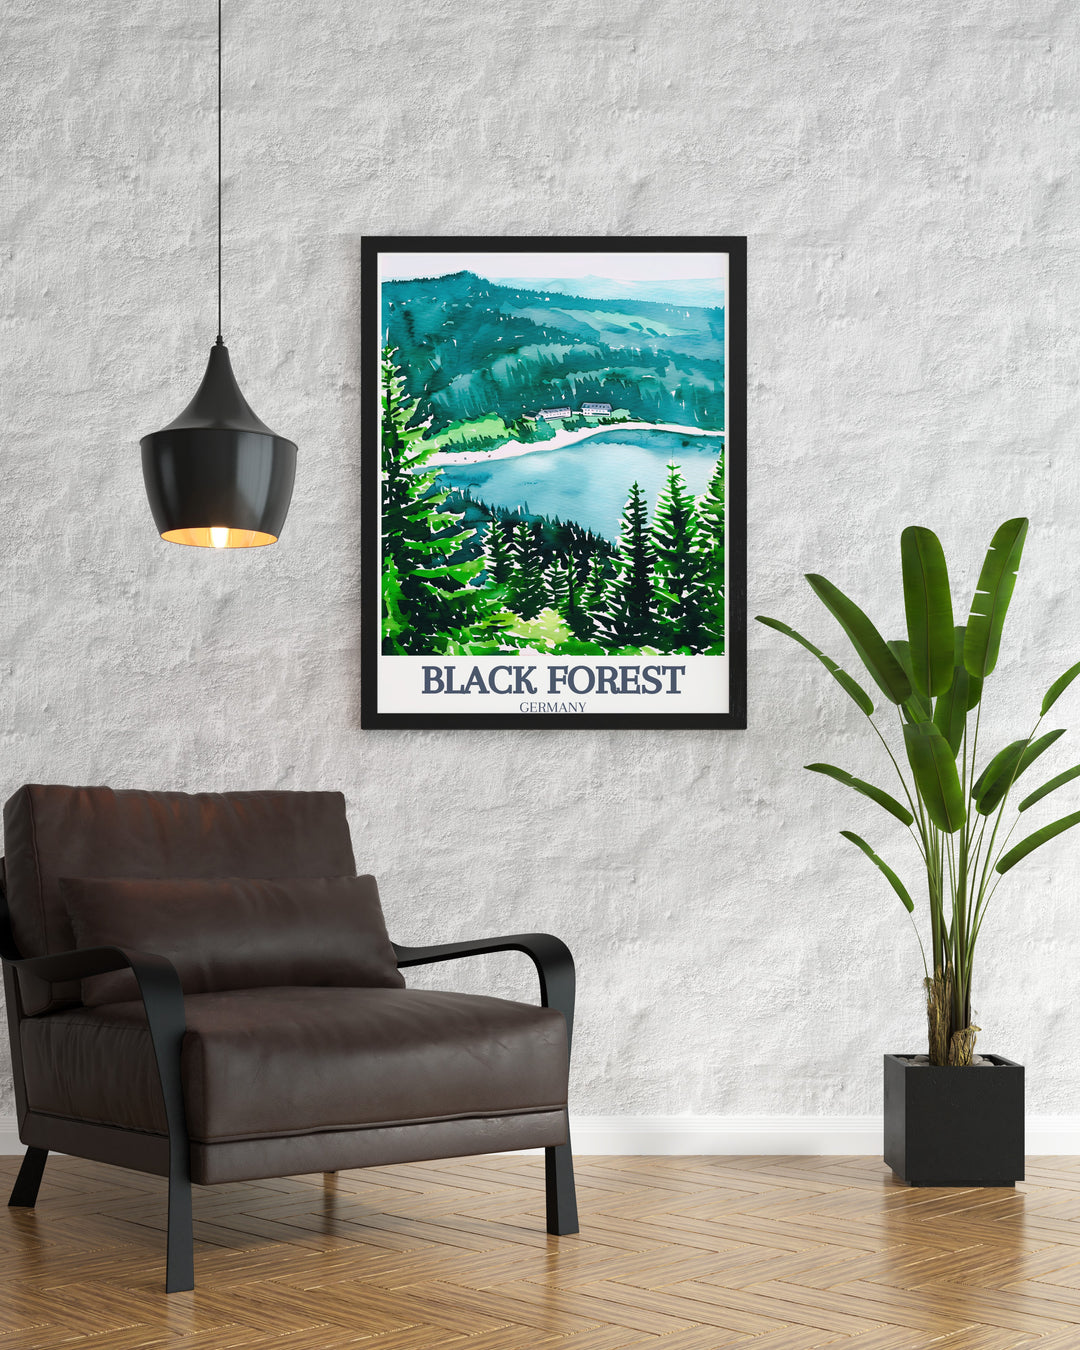 A beautiful depiction of Mummelsee Lake, Triberg Waterfalls in a Schwarzwald Print showcasing the lush Black Forest perfect for enhancing any room with a touch of natures elegance a unique gift for nature lovers and travelers who appreciate Germanys natural beauty